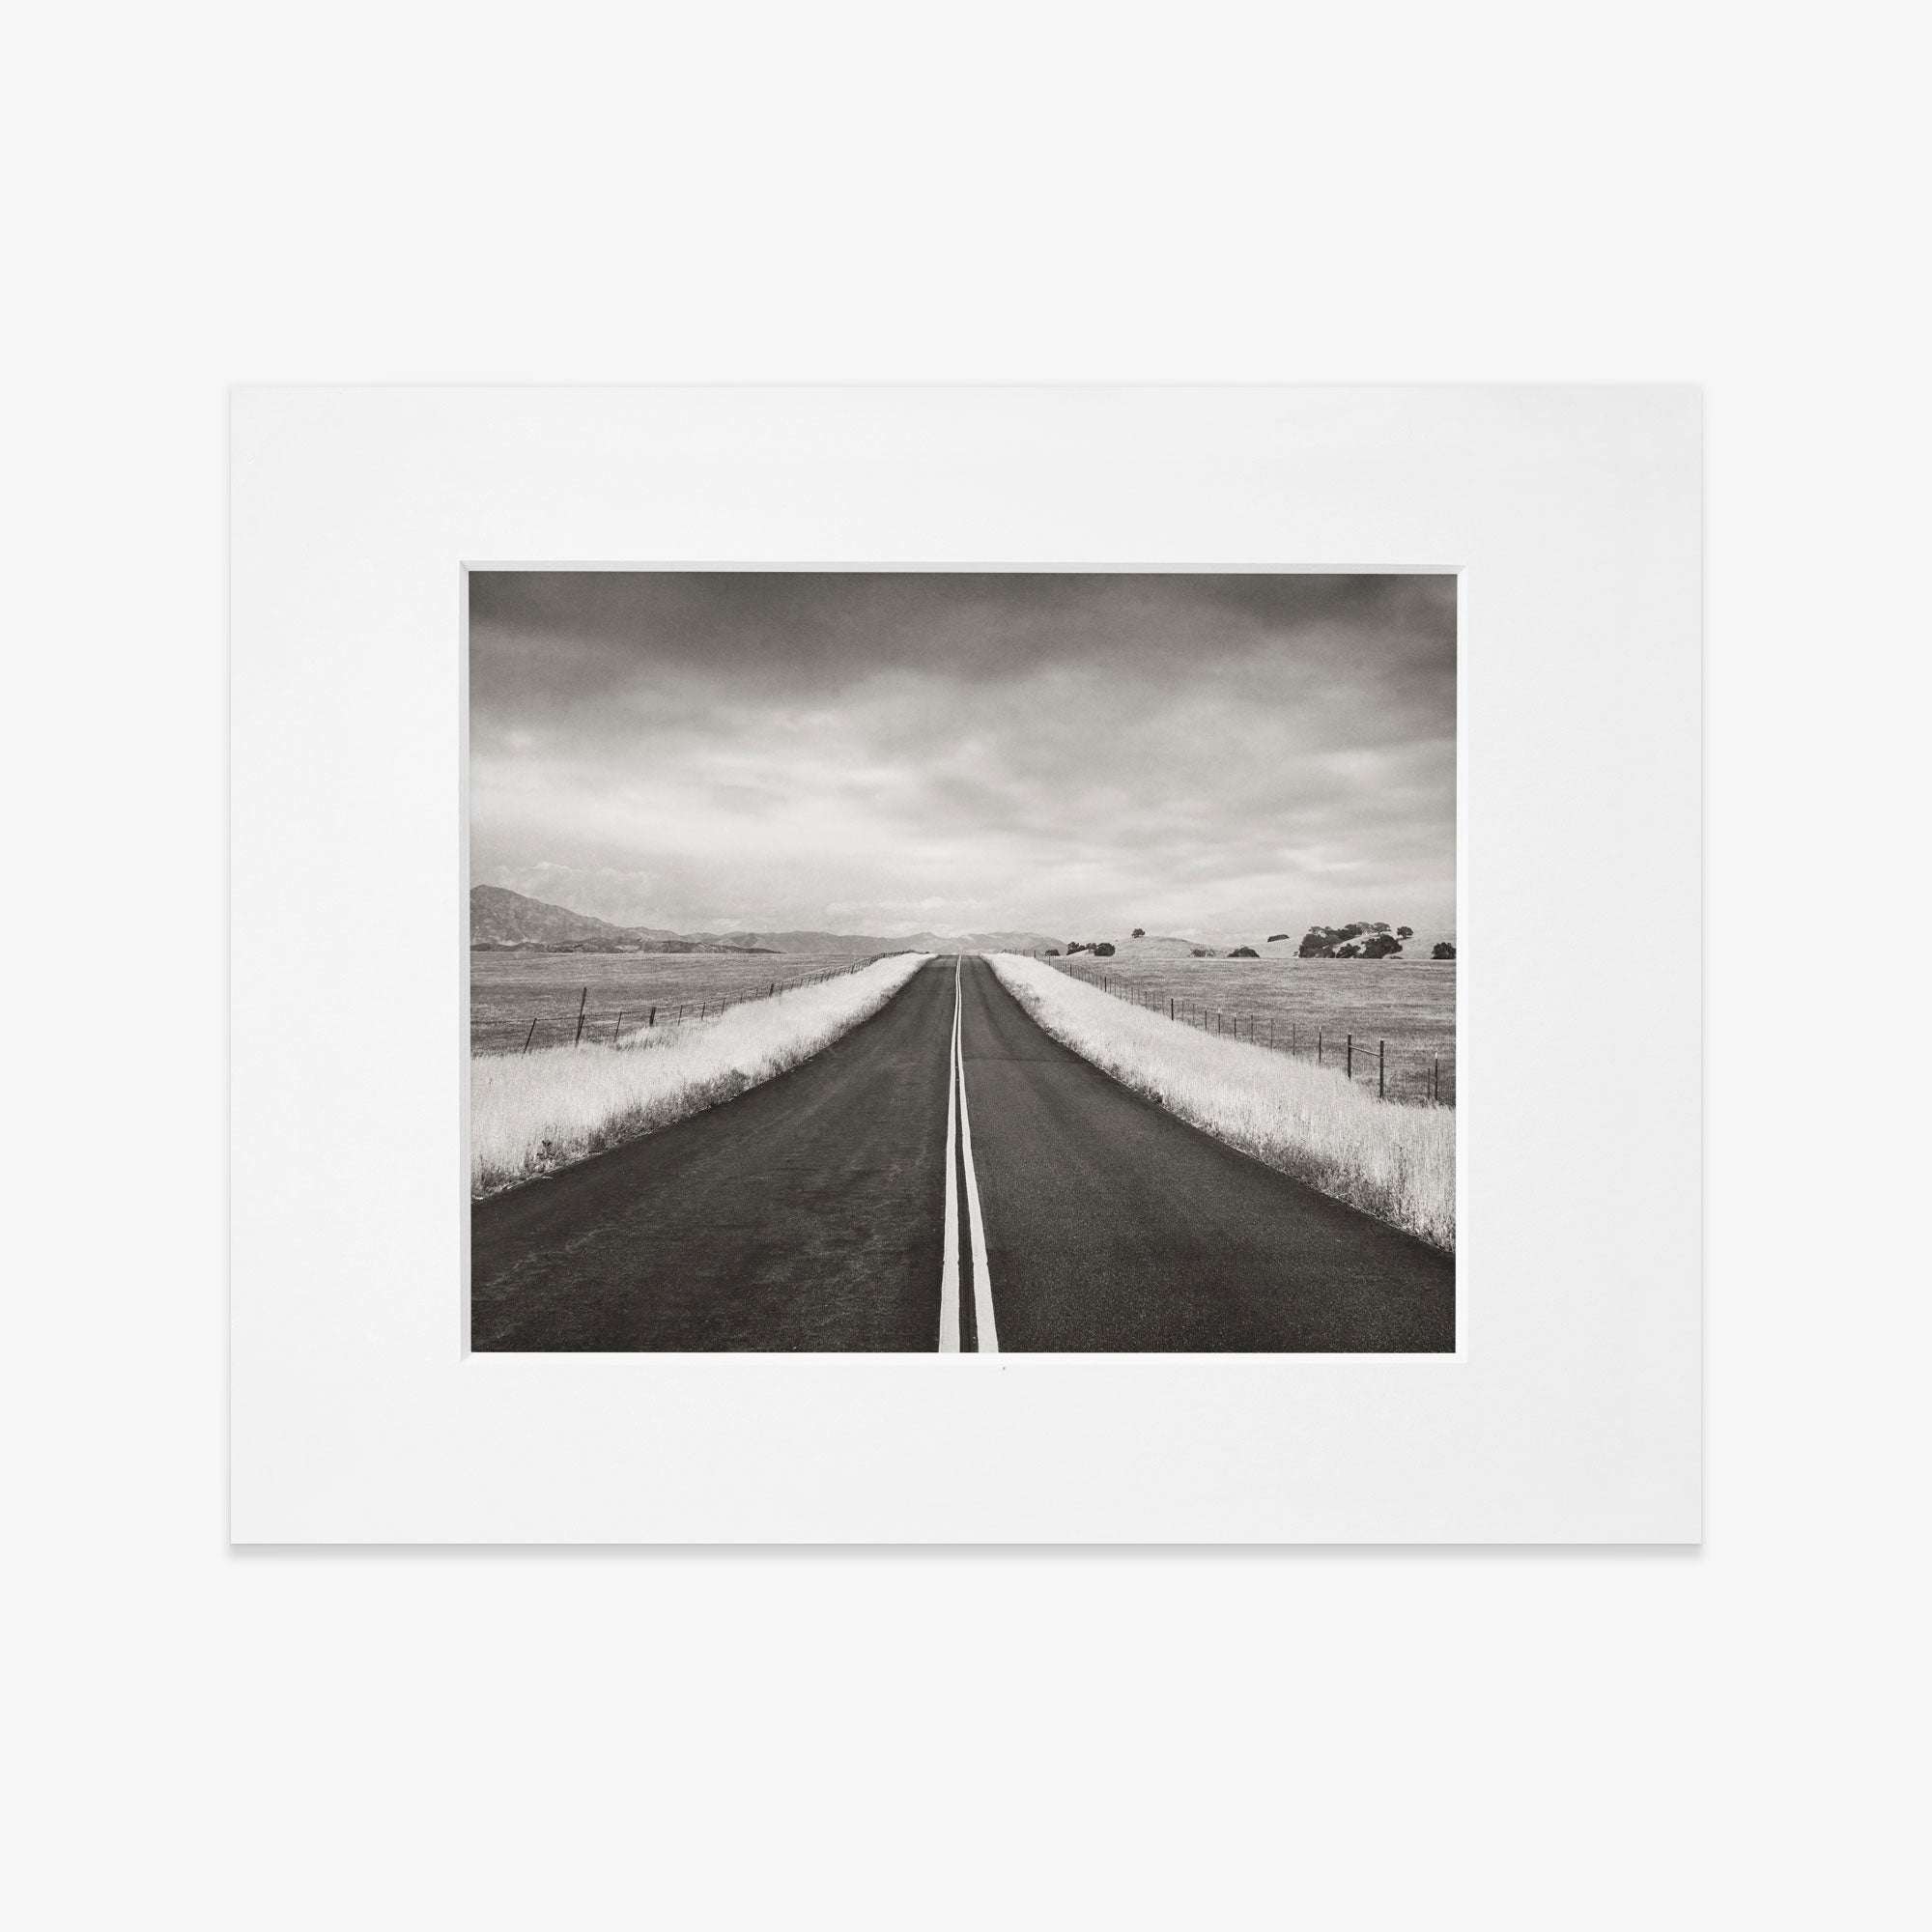 Black and white photograph of a straight road framed by a white border, printed on archival photographic paper, leading through a flat rural landscape under a cloudy sky. This is the Black and White Rural Landscape Art, &#39;American Road Trip&#39; from Offley Green.